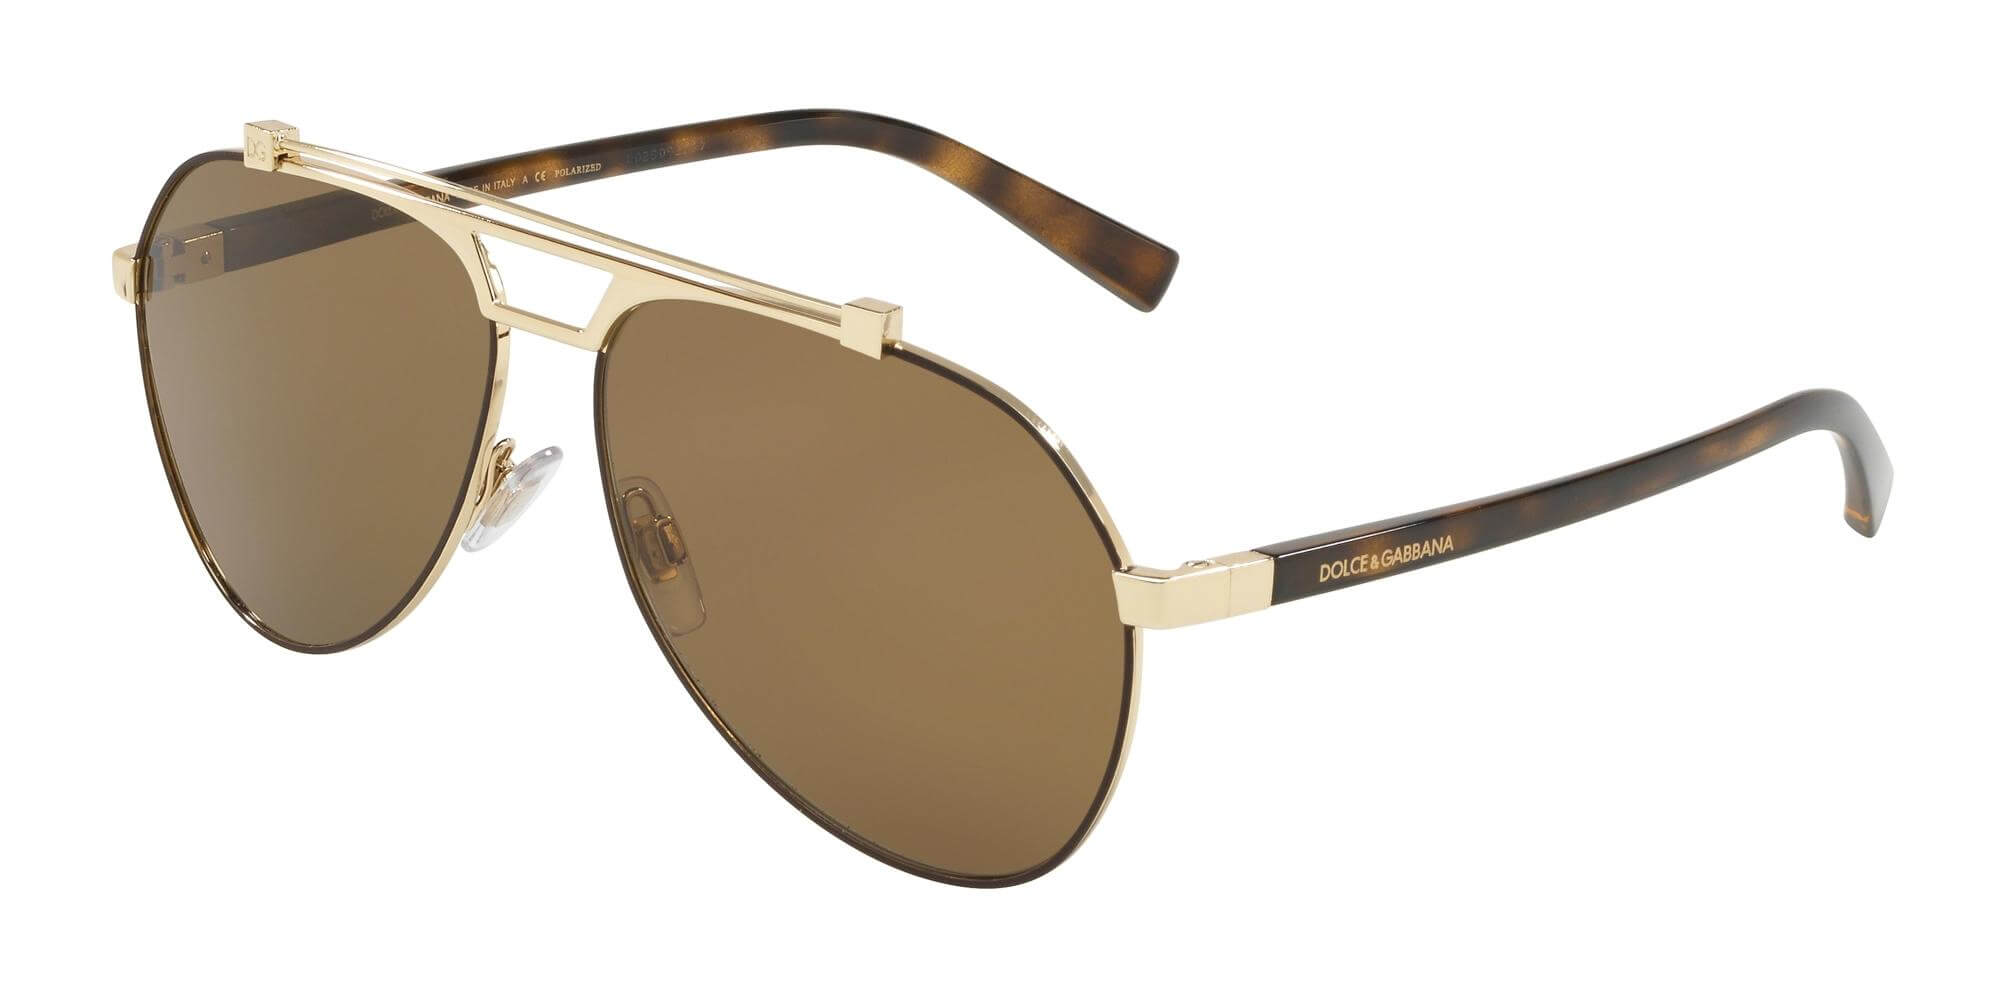 Dolce & GabbanaVIALE PIAVE DG 2189Brown Gold/brown (1320/83)